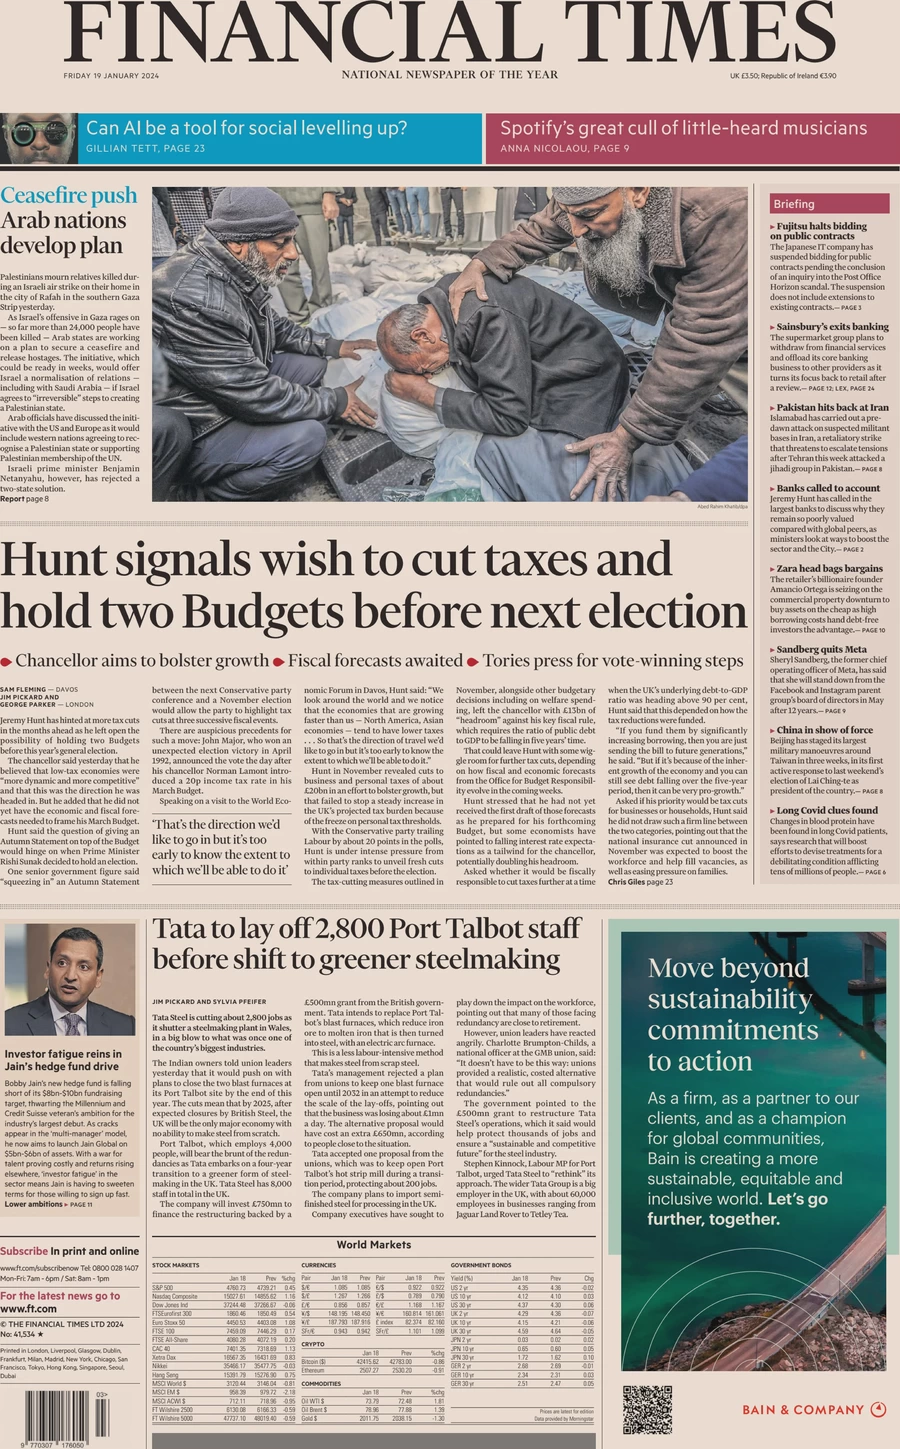 Financial Times - Hunt signals wish to cut taxes and hold two Budgets before next election 